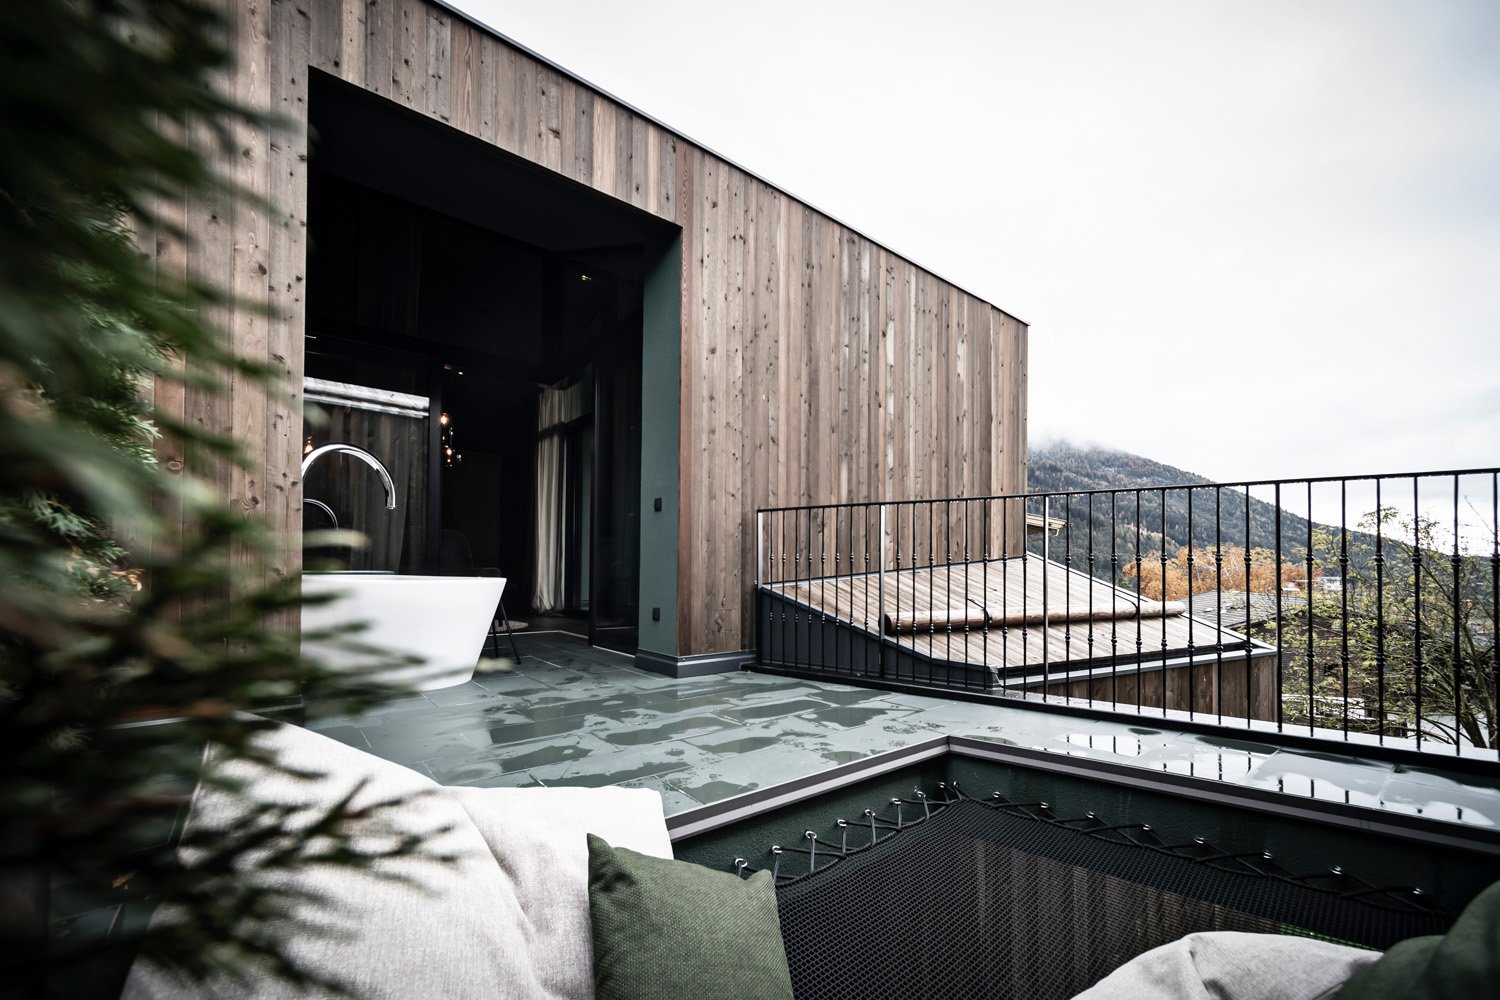 © Alex Filz, courtesy noa* network of architecture | An open patio accessible from all areas of the suite is the most intimate and all-enveloping space, complementing the private sauna with an outdoor tub for guests’ exclusive use.